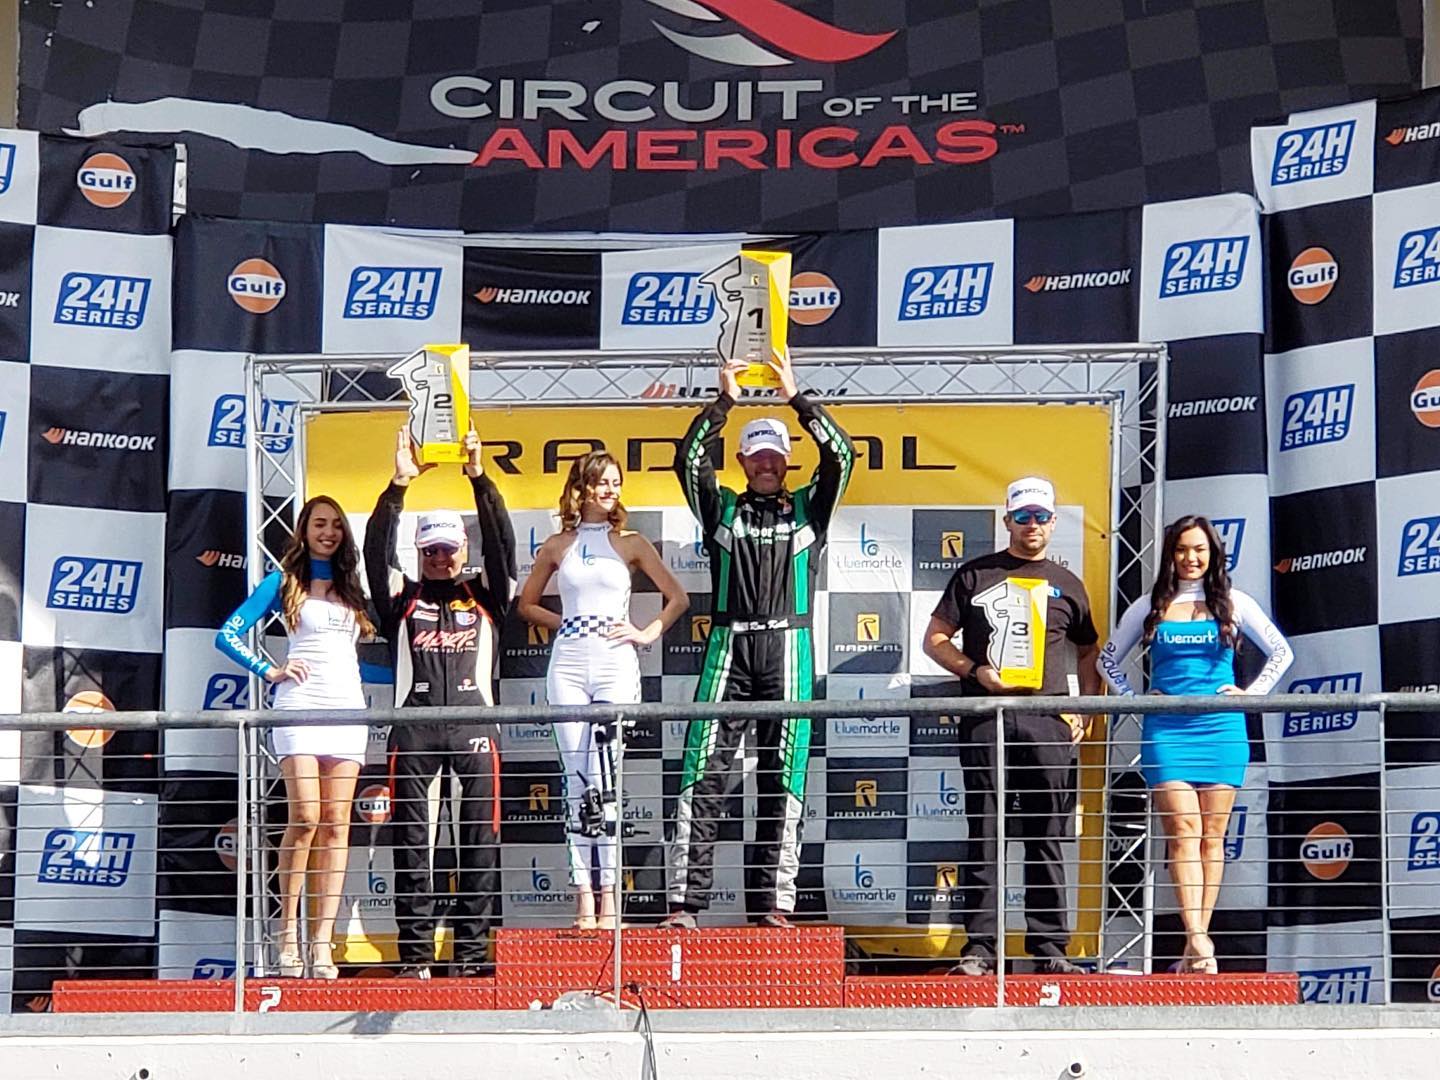 Wagner, Comeau and Miller clinch titles at COTA, Dickinson wins on debut